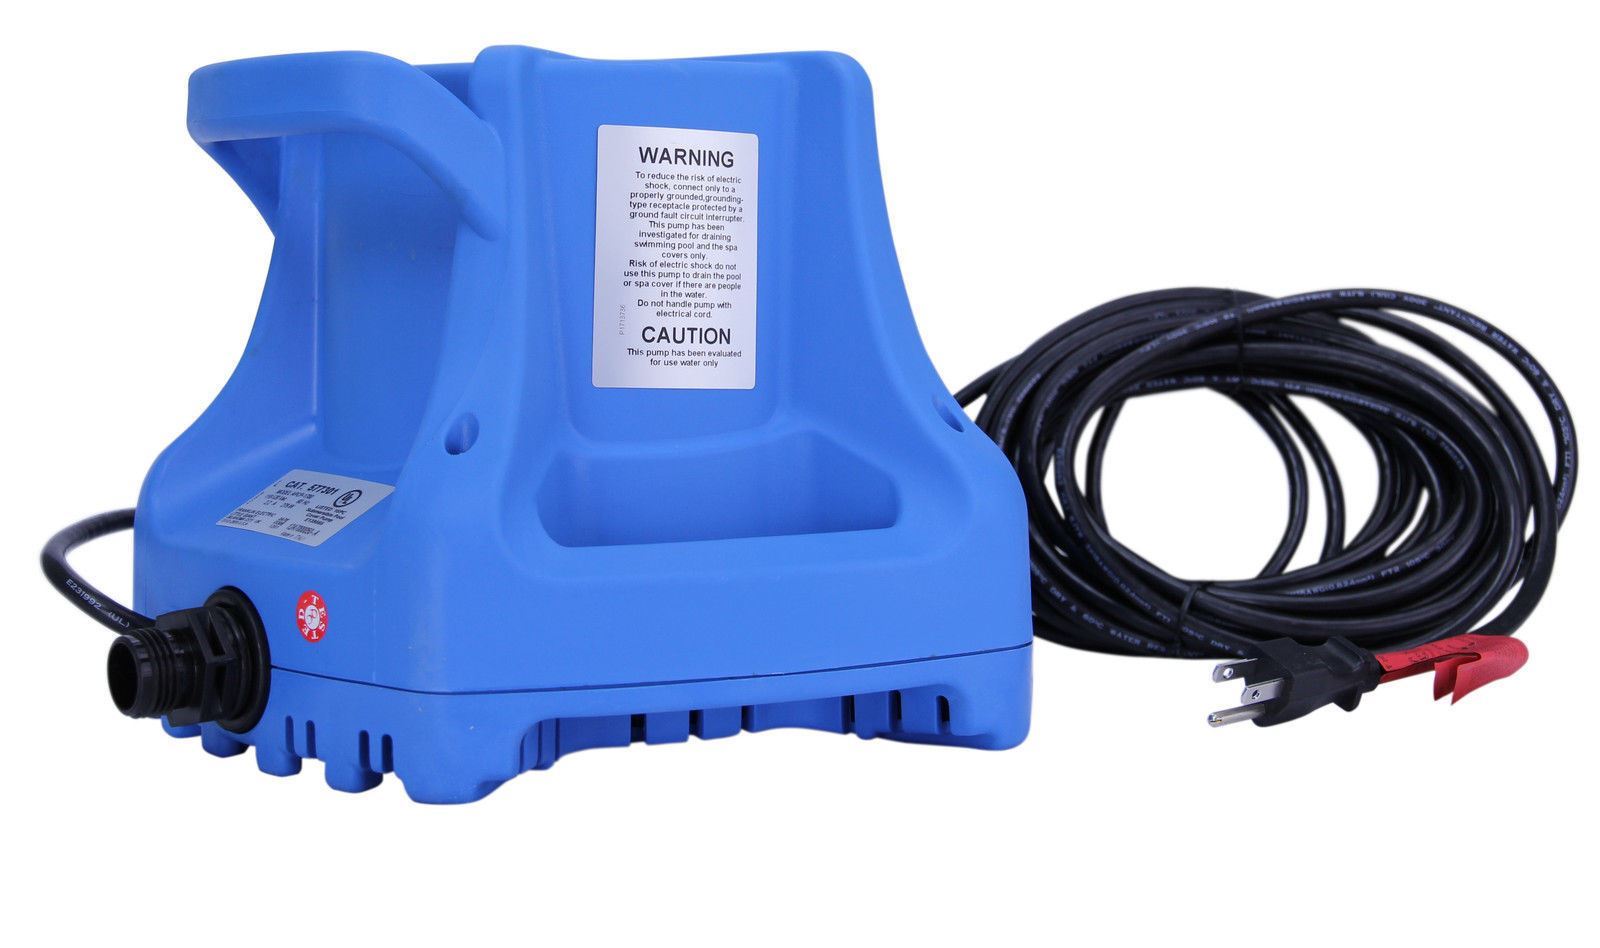 Little Giant by Franklin Electric Little Giant 577301 APCP-1700 Pool Cover Pump 1/3 HP 25 GPM 25' Cord